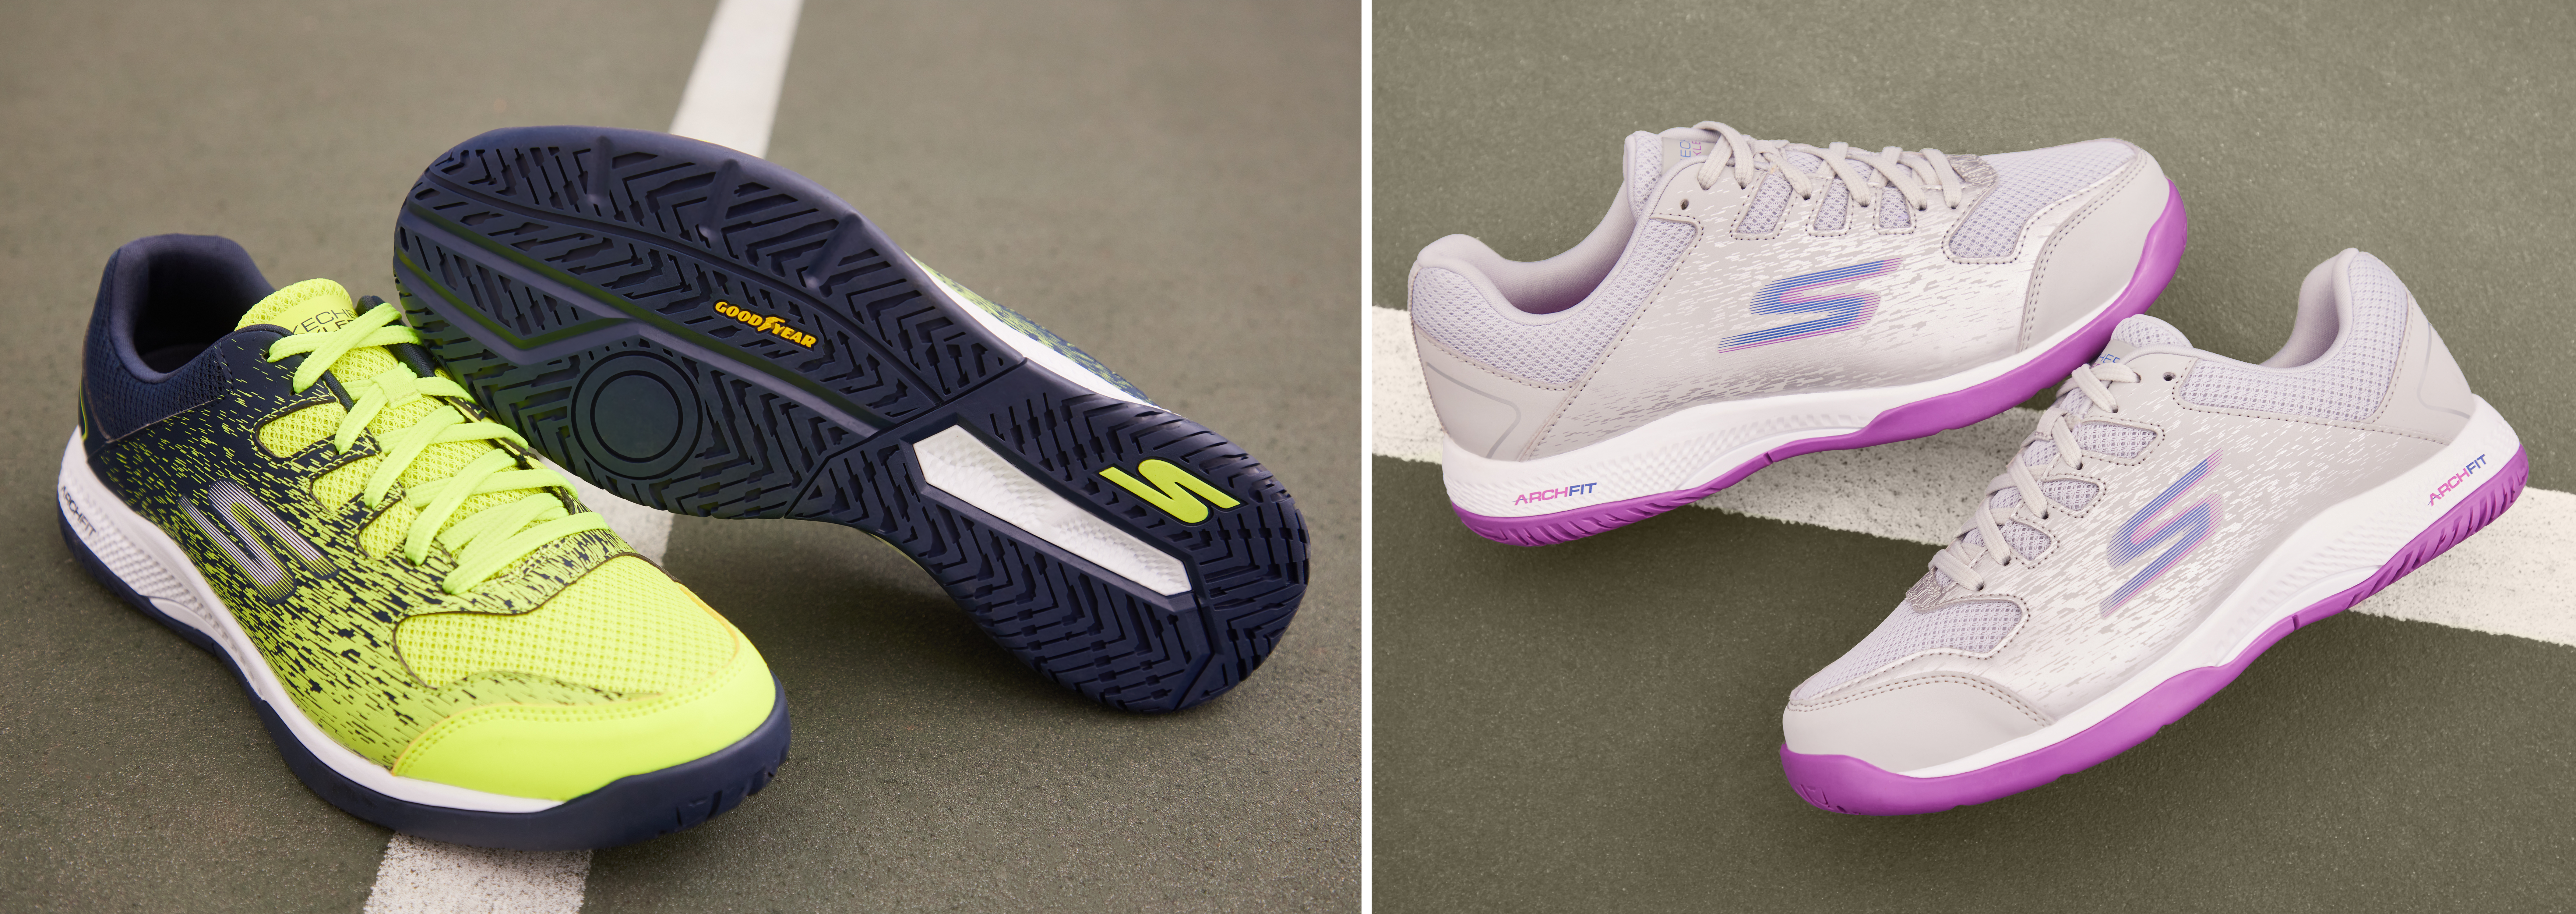 Skechers Official Footwear of US Open Championships | Business